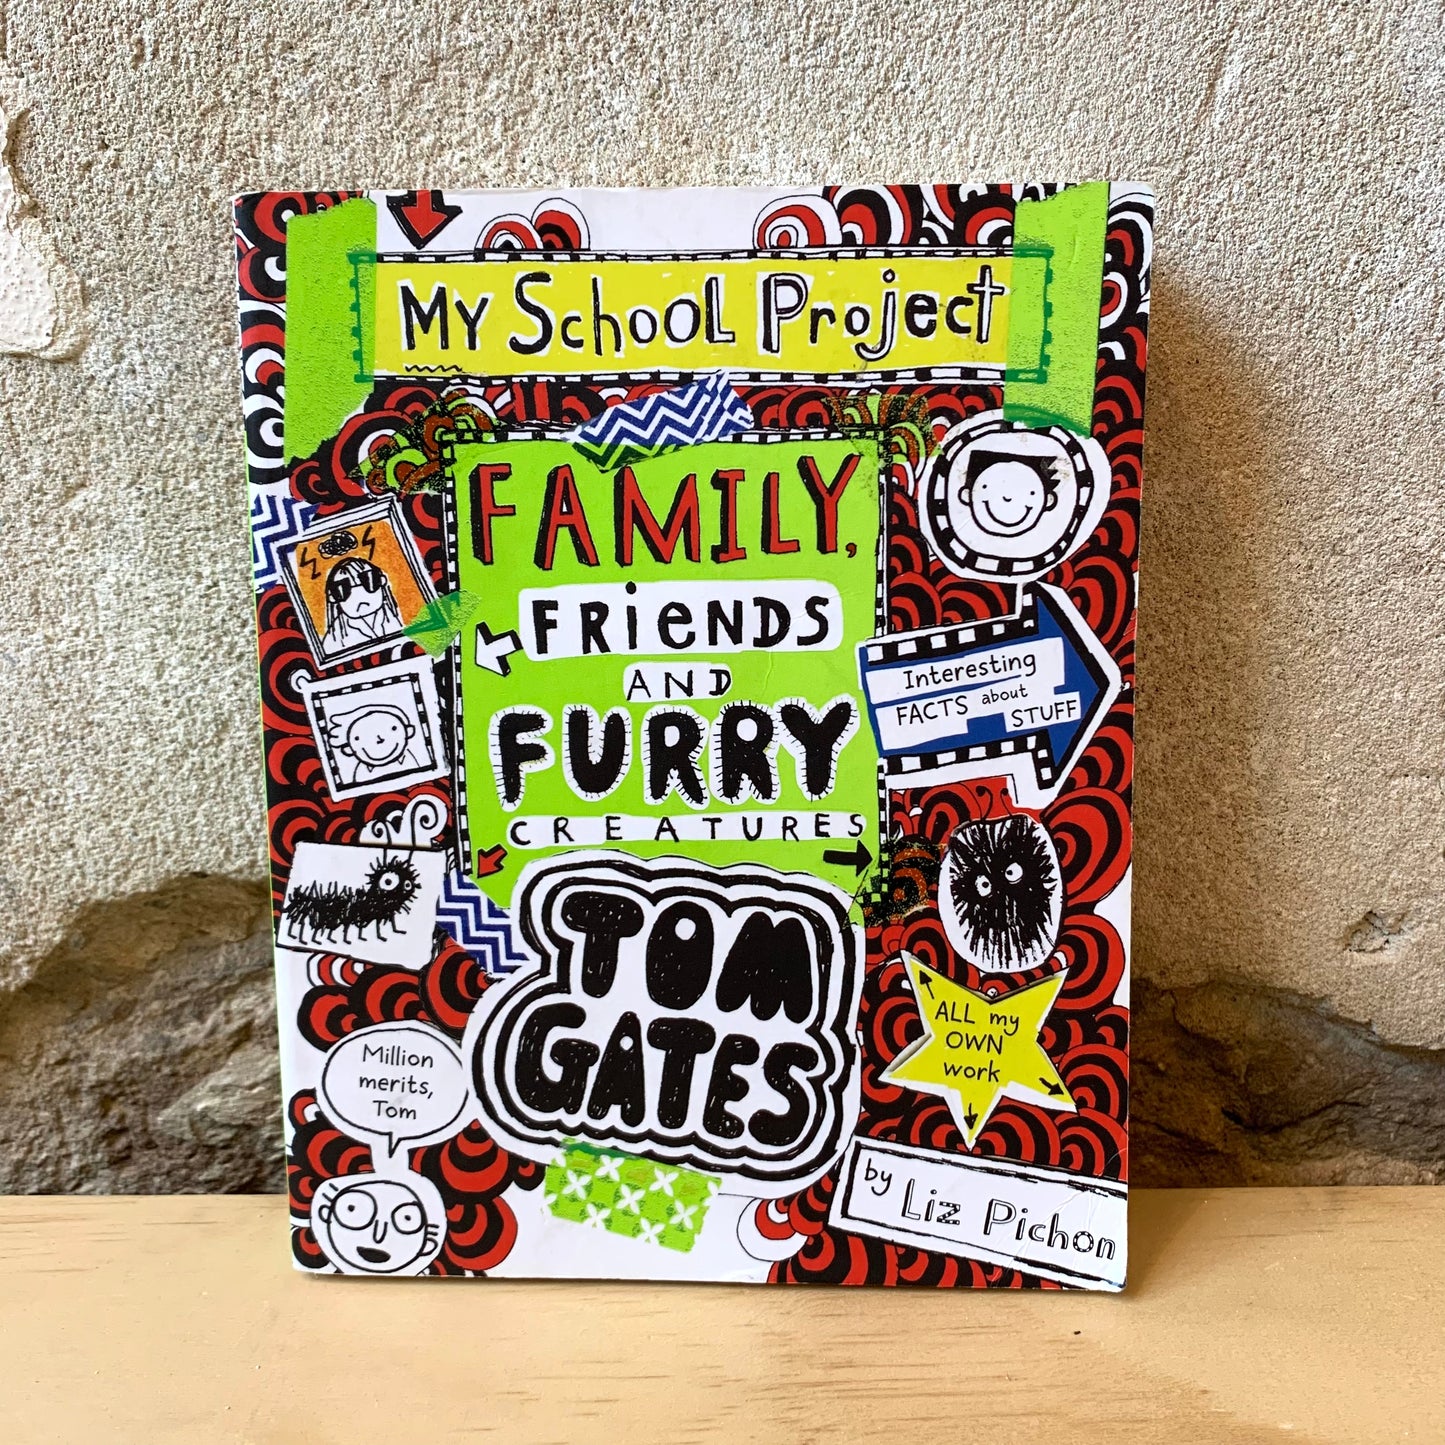 Tom Gates. Family, Friends and Furry Creatures: My School Project – Liz Pichon